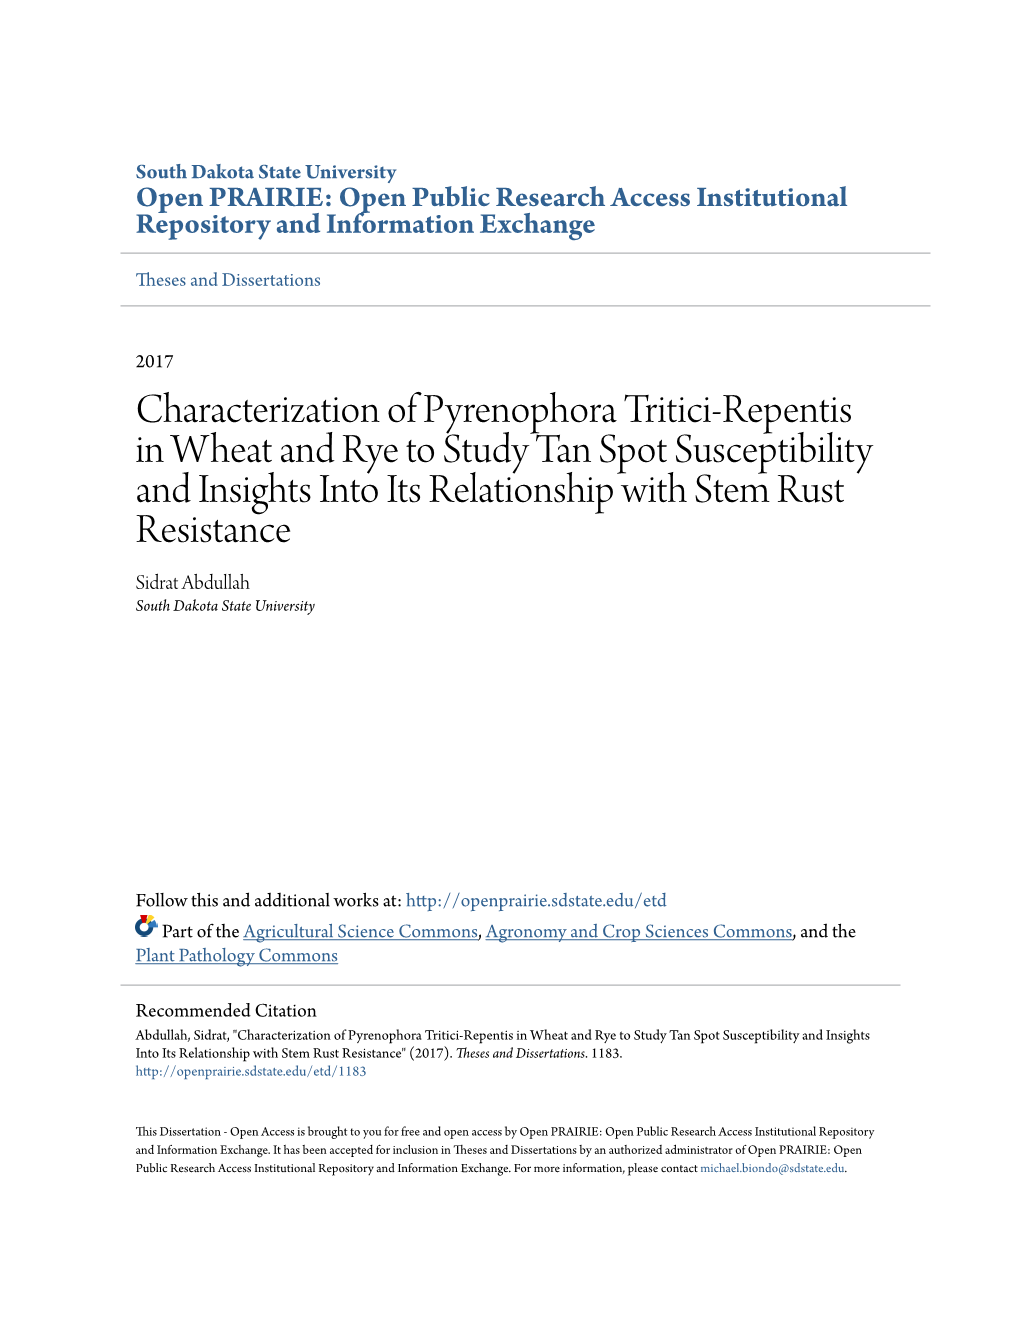 Characterization of Pyrenophora Tritici-Repentis In